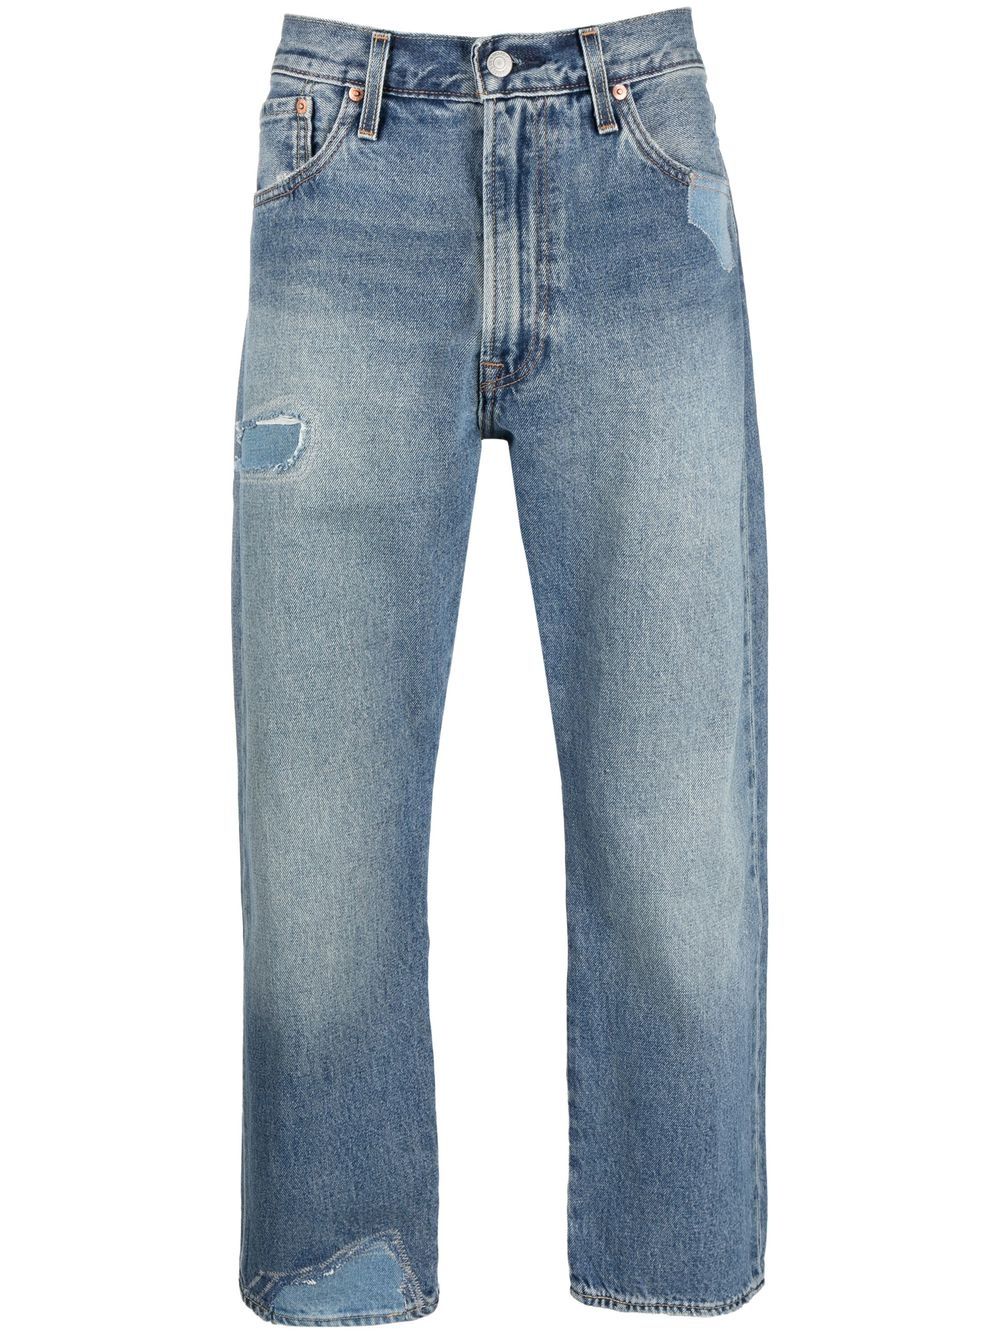 Levi's 551 straight-leg cropped jeans